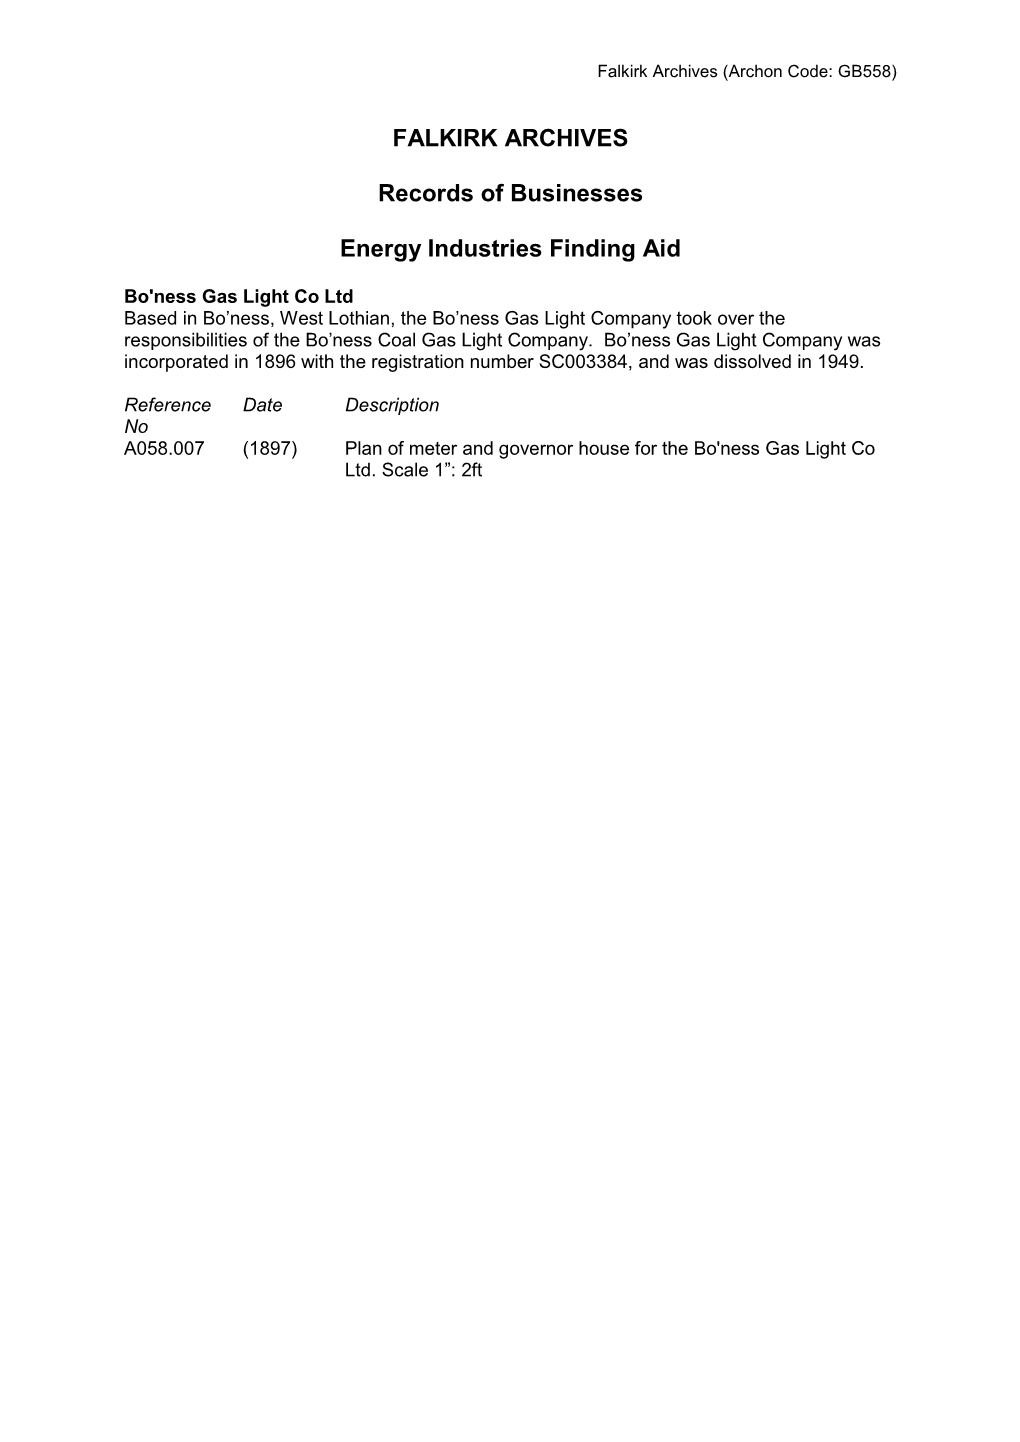 Energy Industries Finding Aid